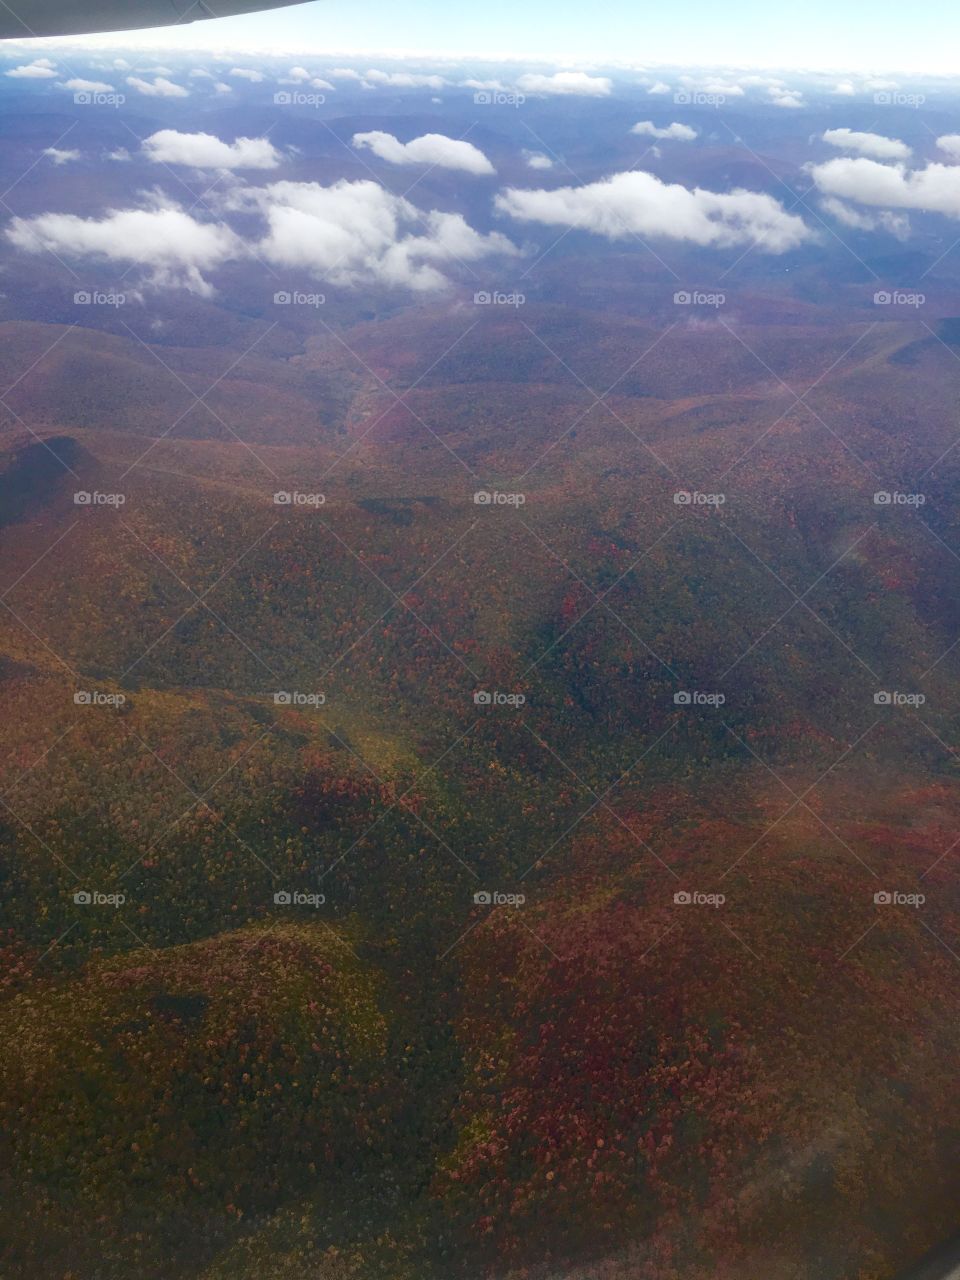 A great shot of the foliage in upstate NY from above.